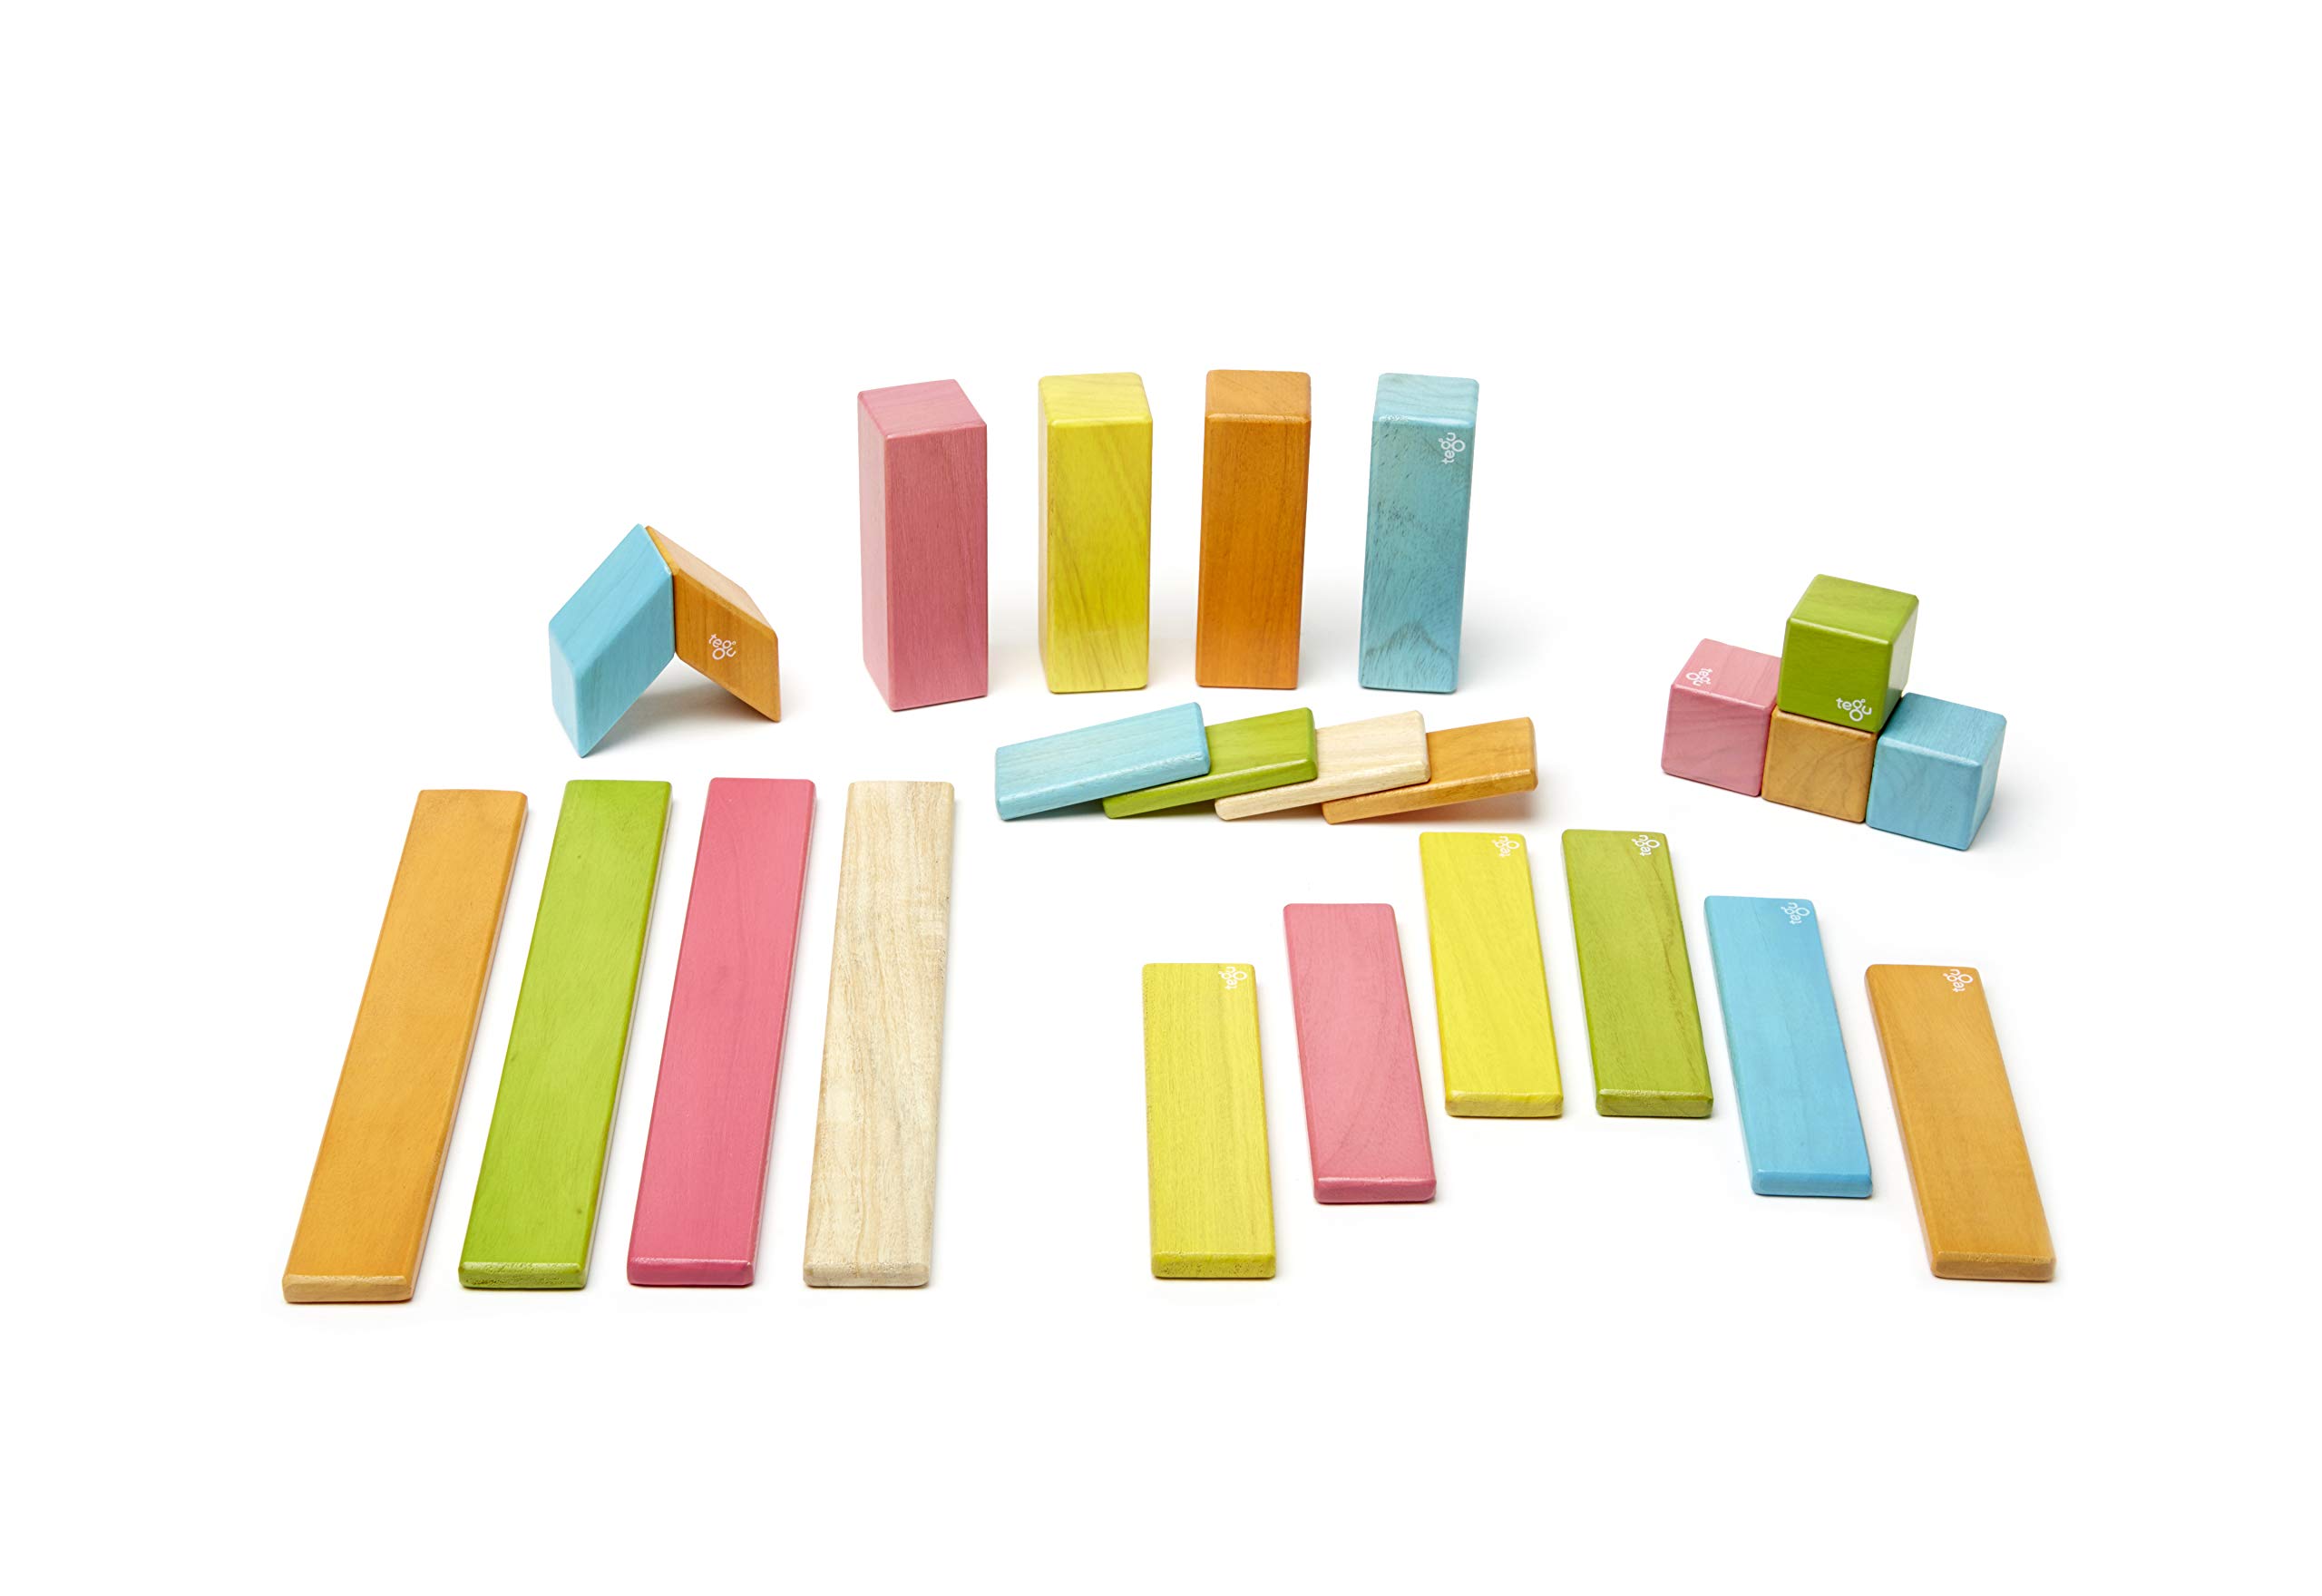 24 Piece Tegu Magnetic Wooden Block Set, Tints, 1-99 years old